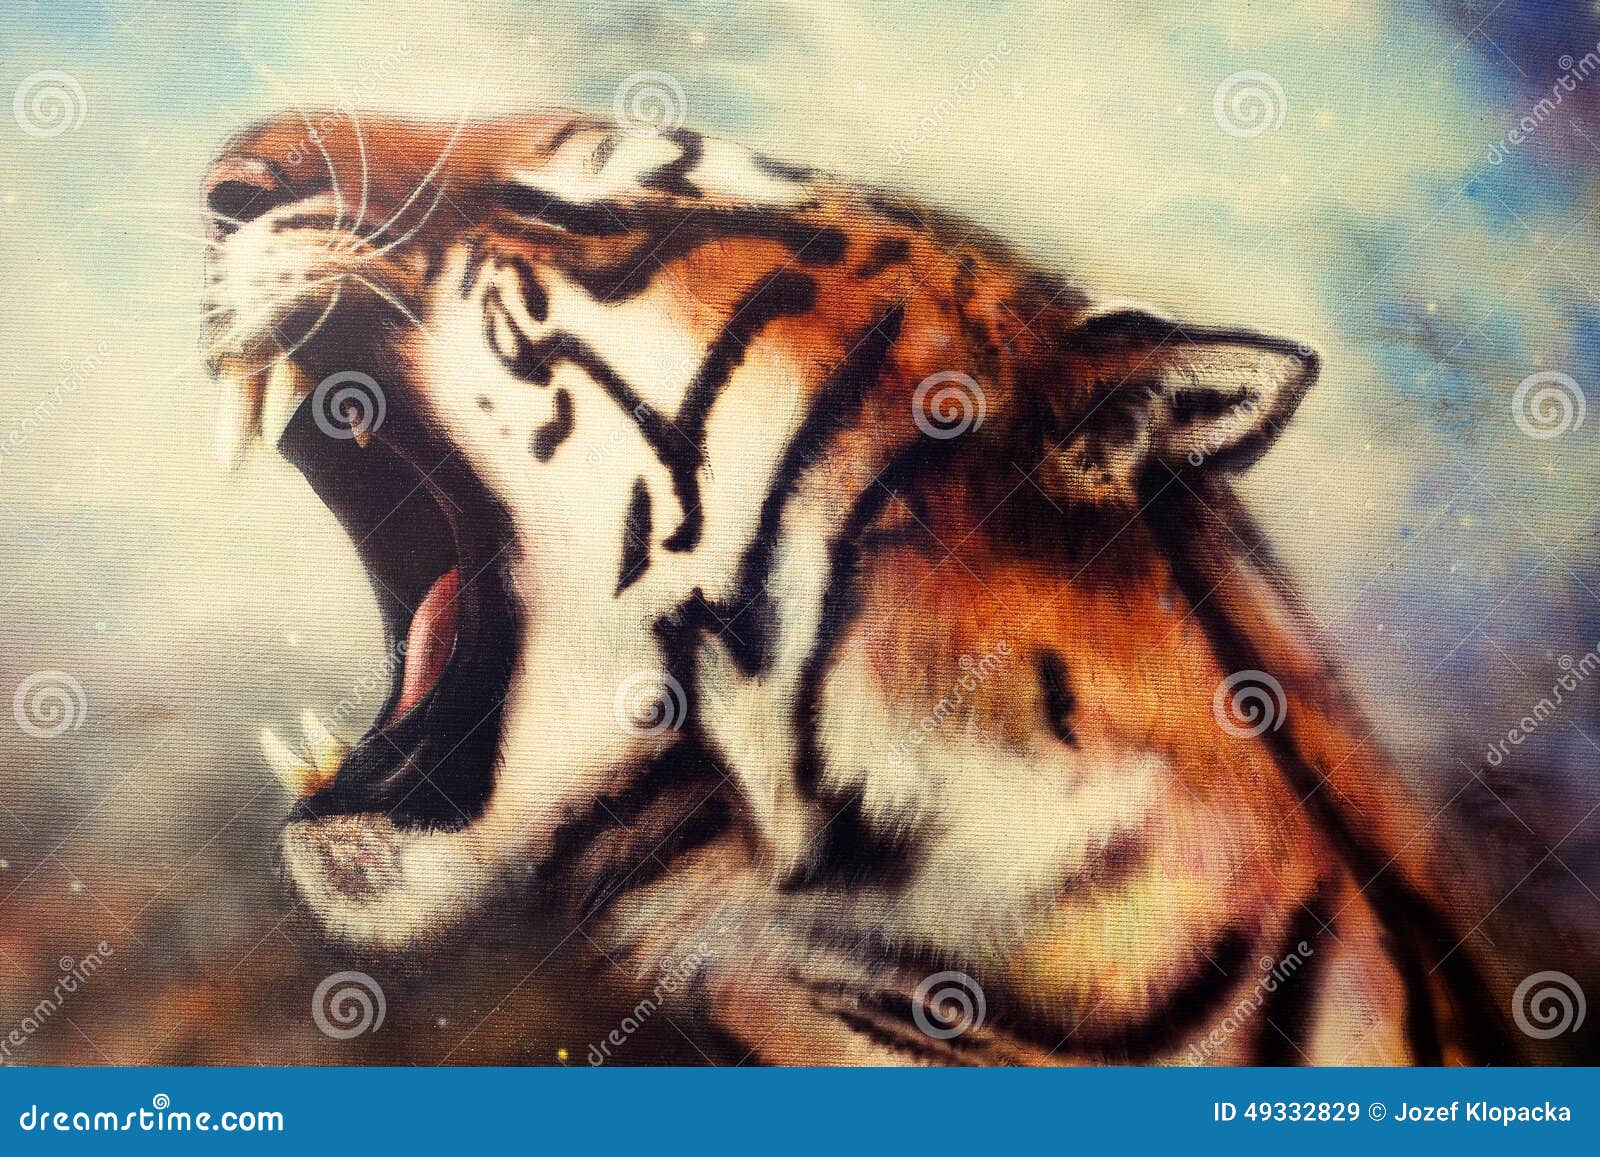  Airbrush  Painting Of A Roaring Tiger  Stock Illustration 